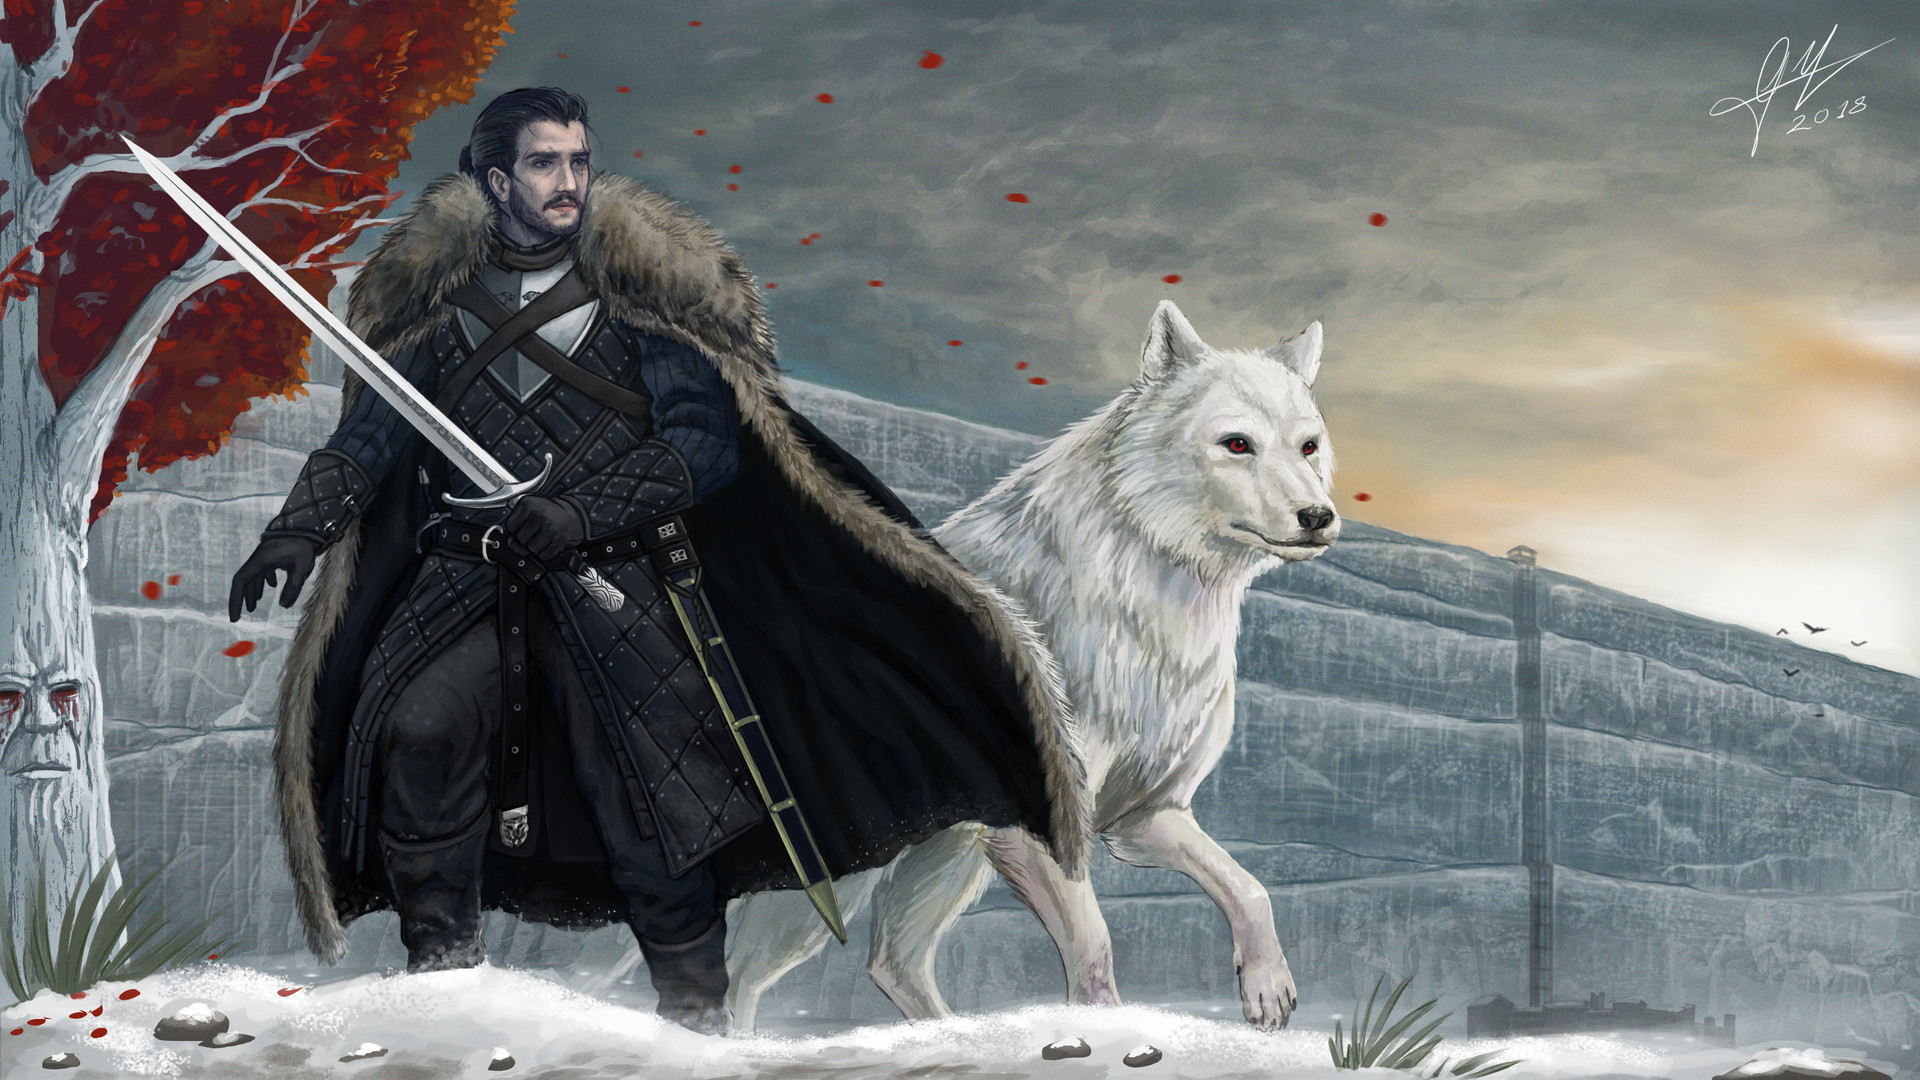 jon Snow and his direwolf Ghost form the 7th season of Game of Thrones.